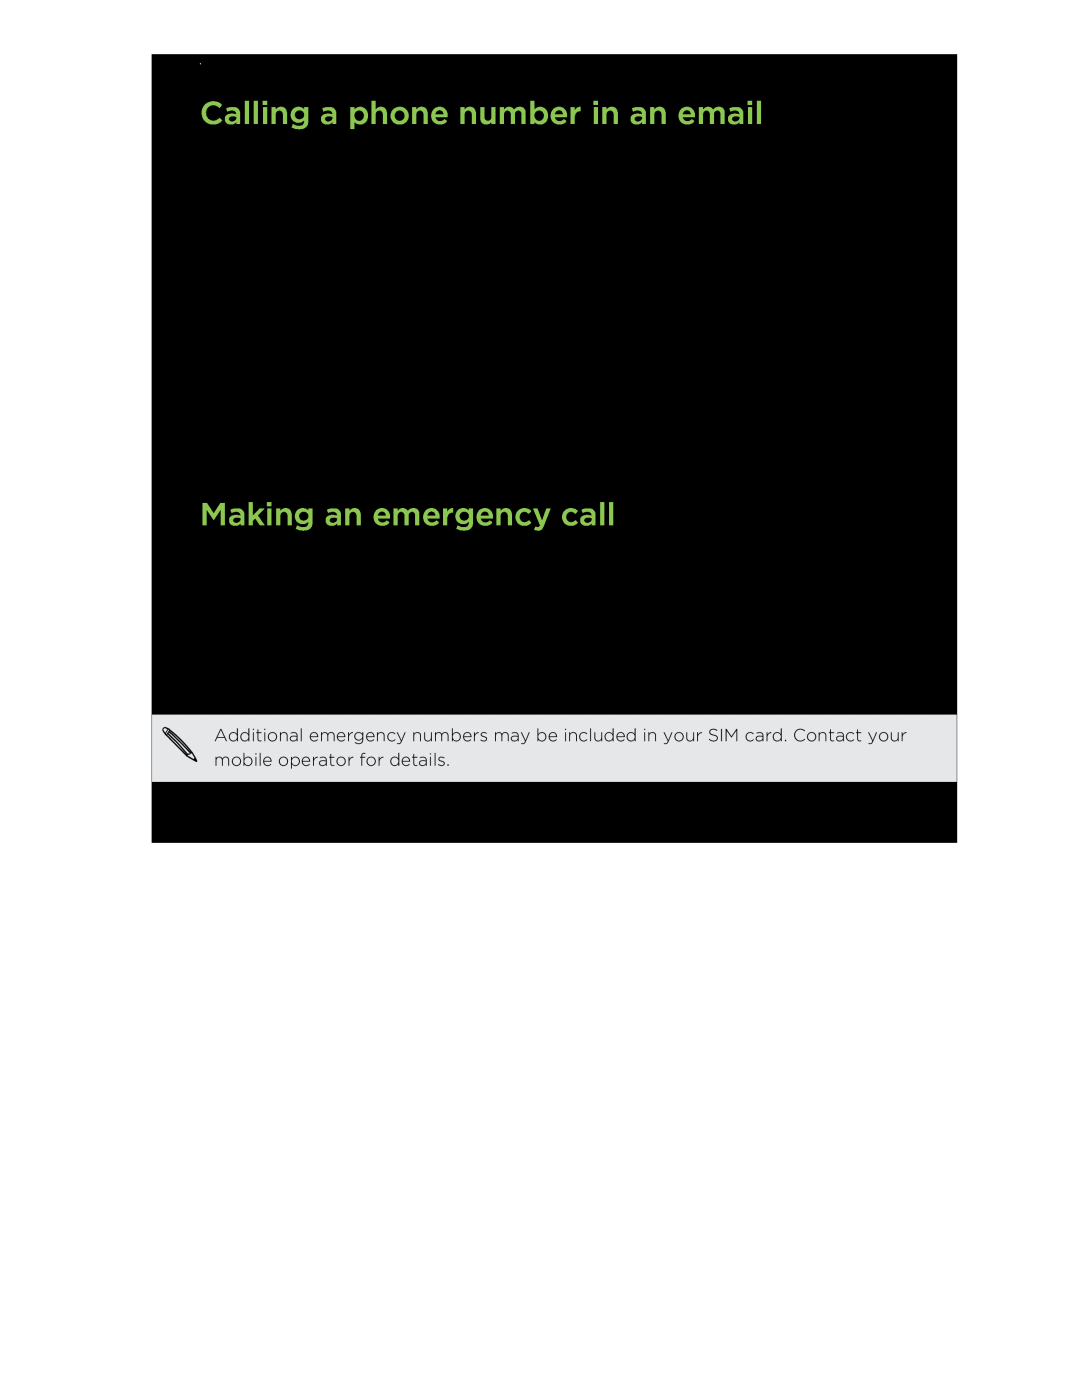 HTC S manual Calling a phone number in an email, Making an emergency call, Phone calls 